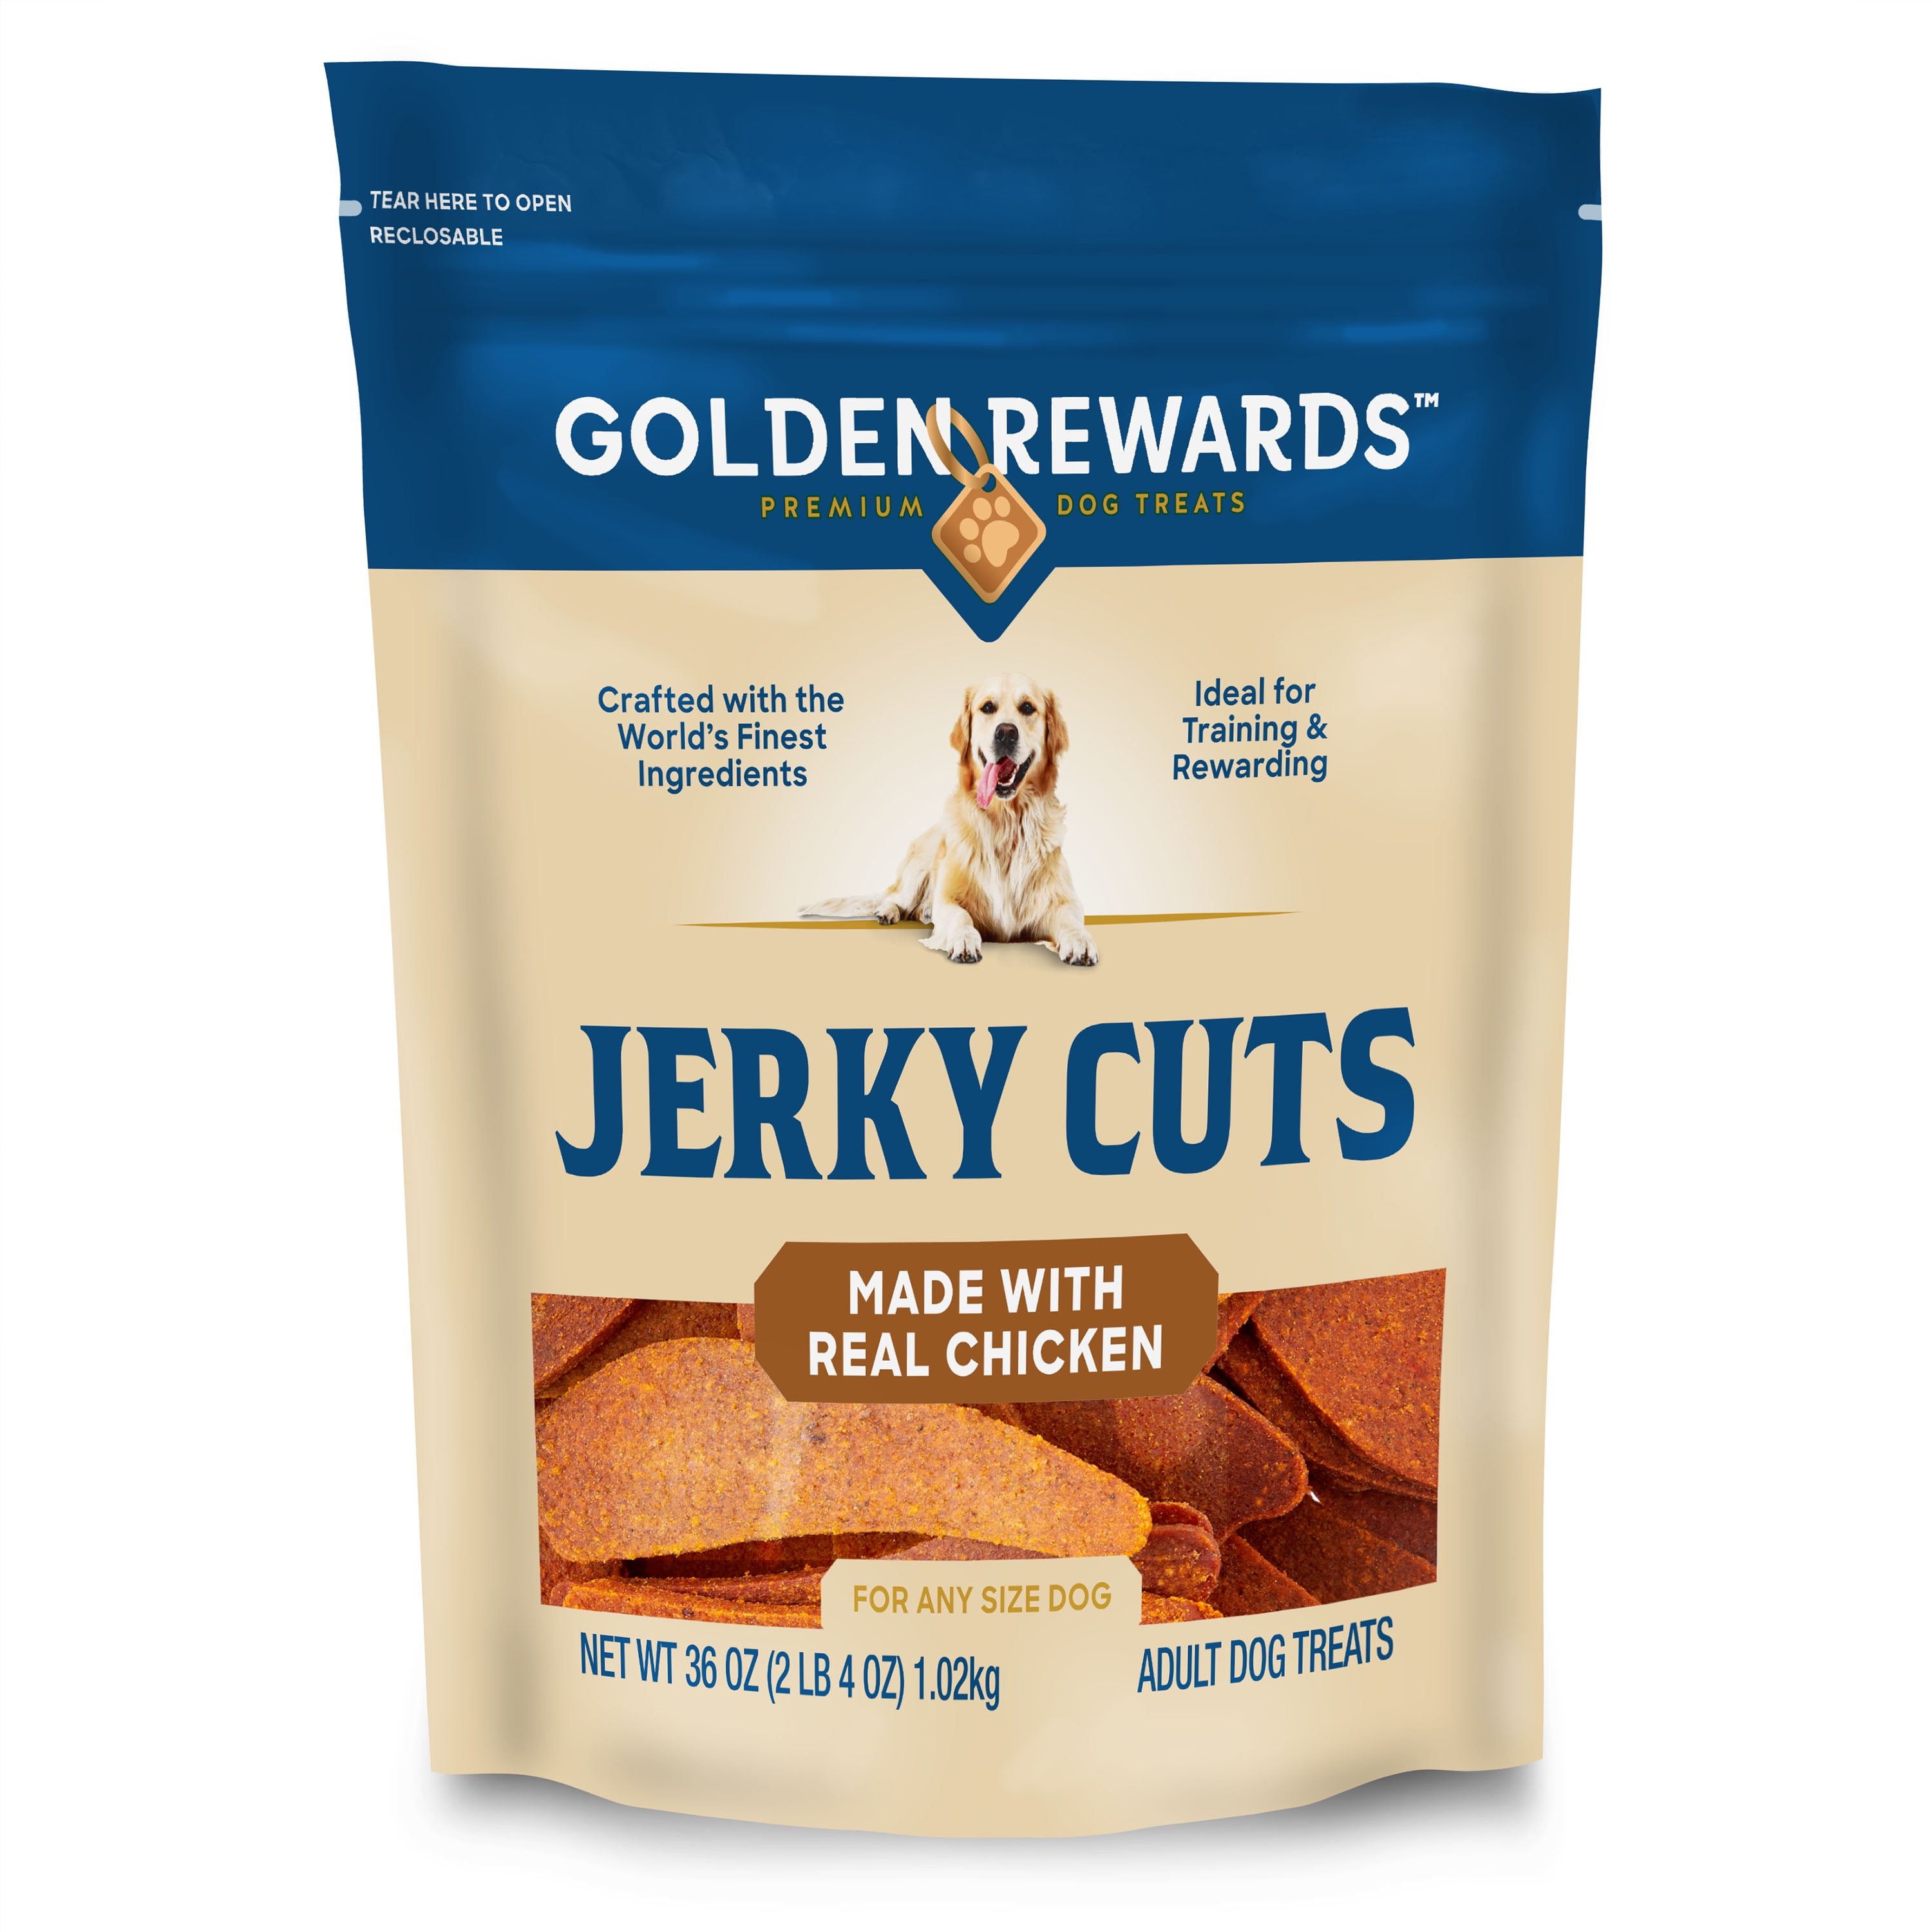 Golden Rewards Jerky Cuts Adult Dog Dry Jerky Treats with Real Chicken, 36 oz